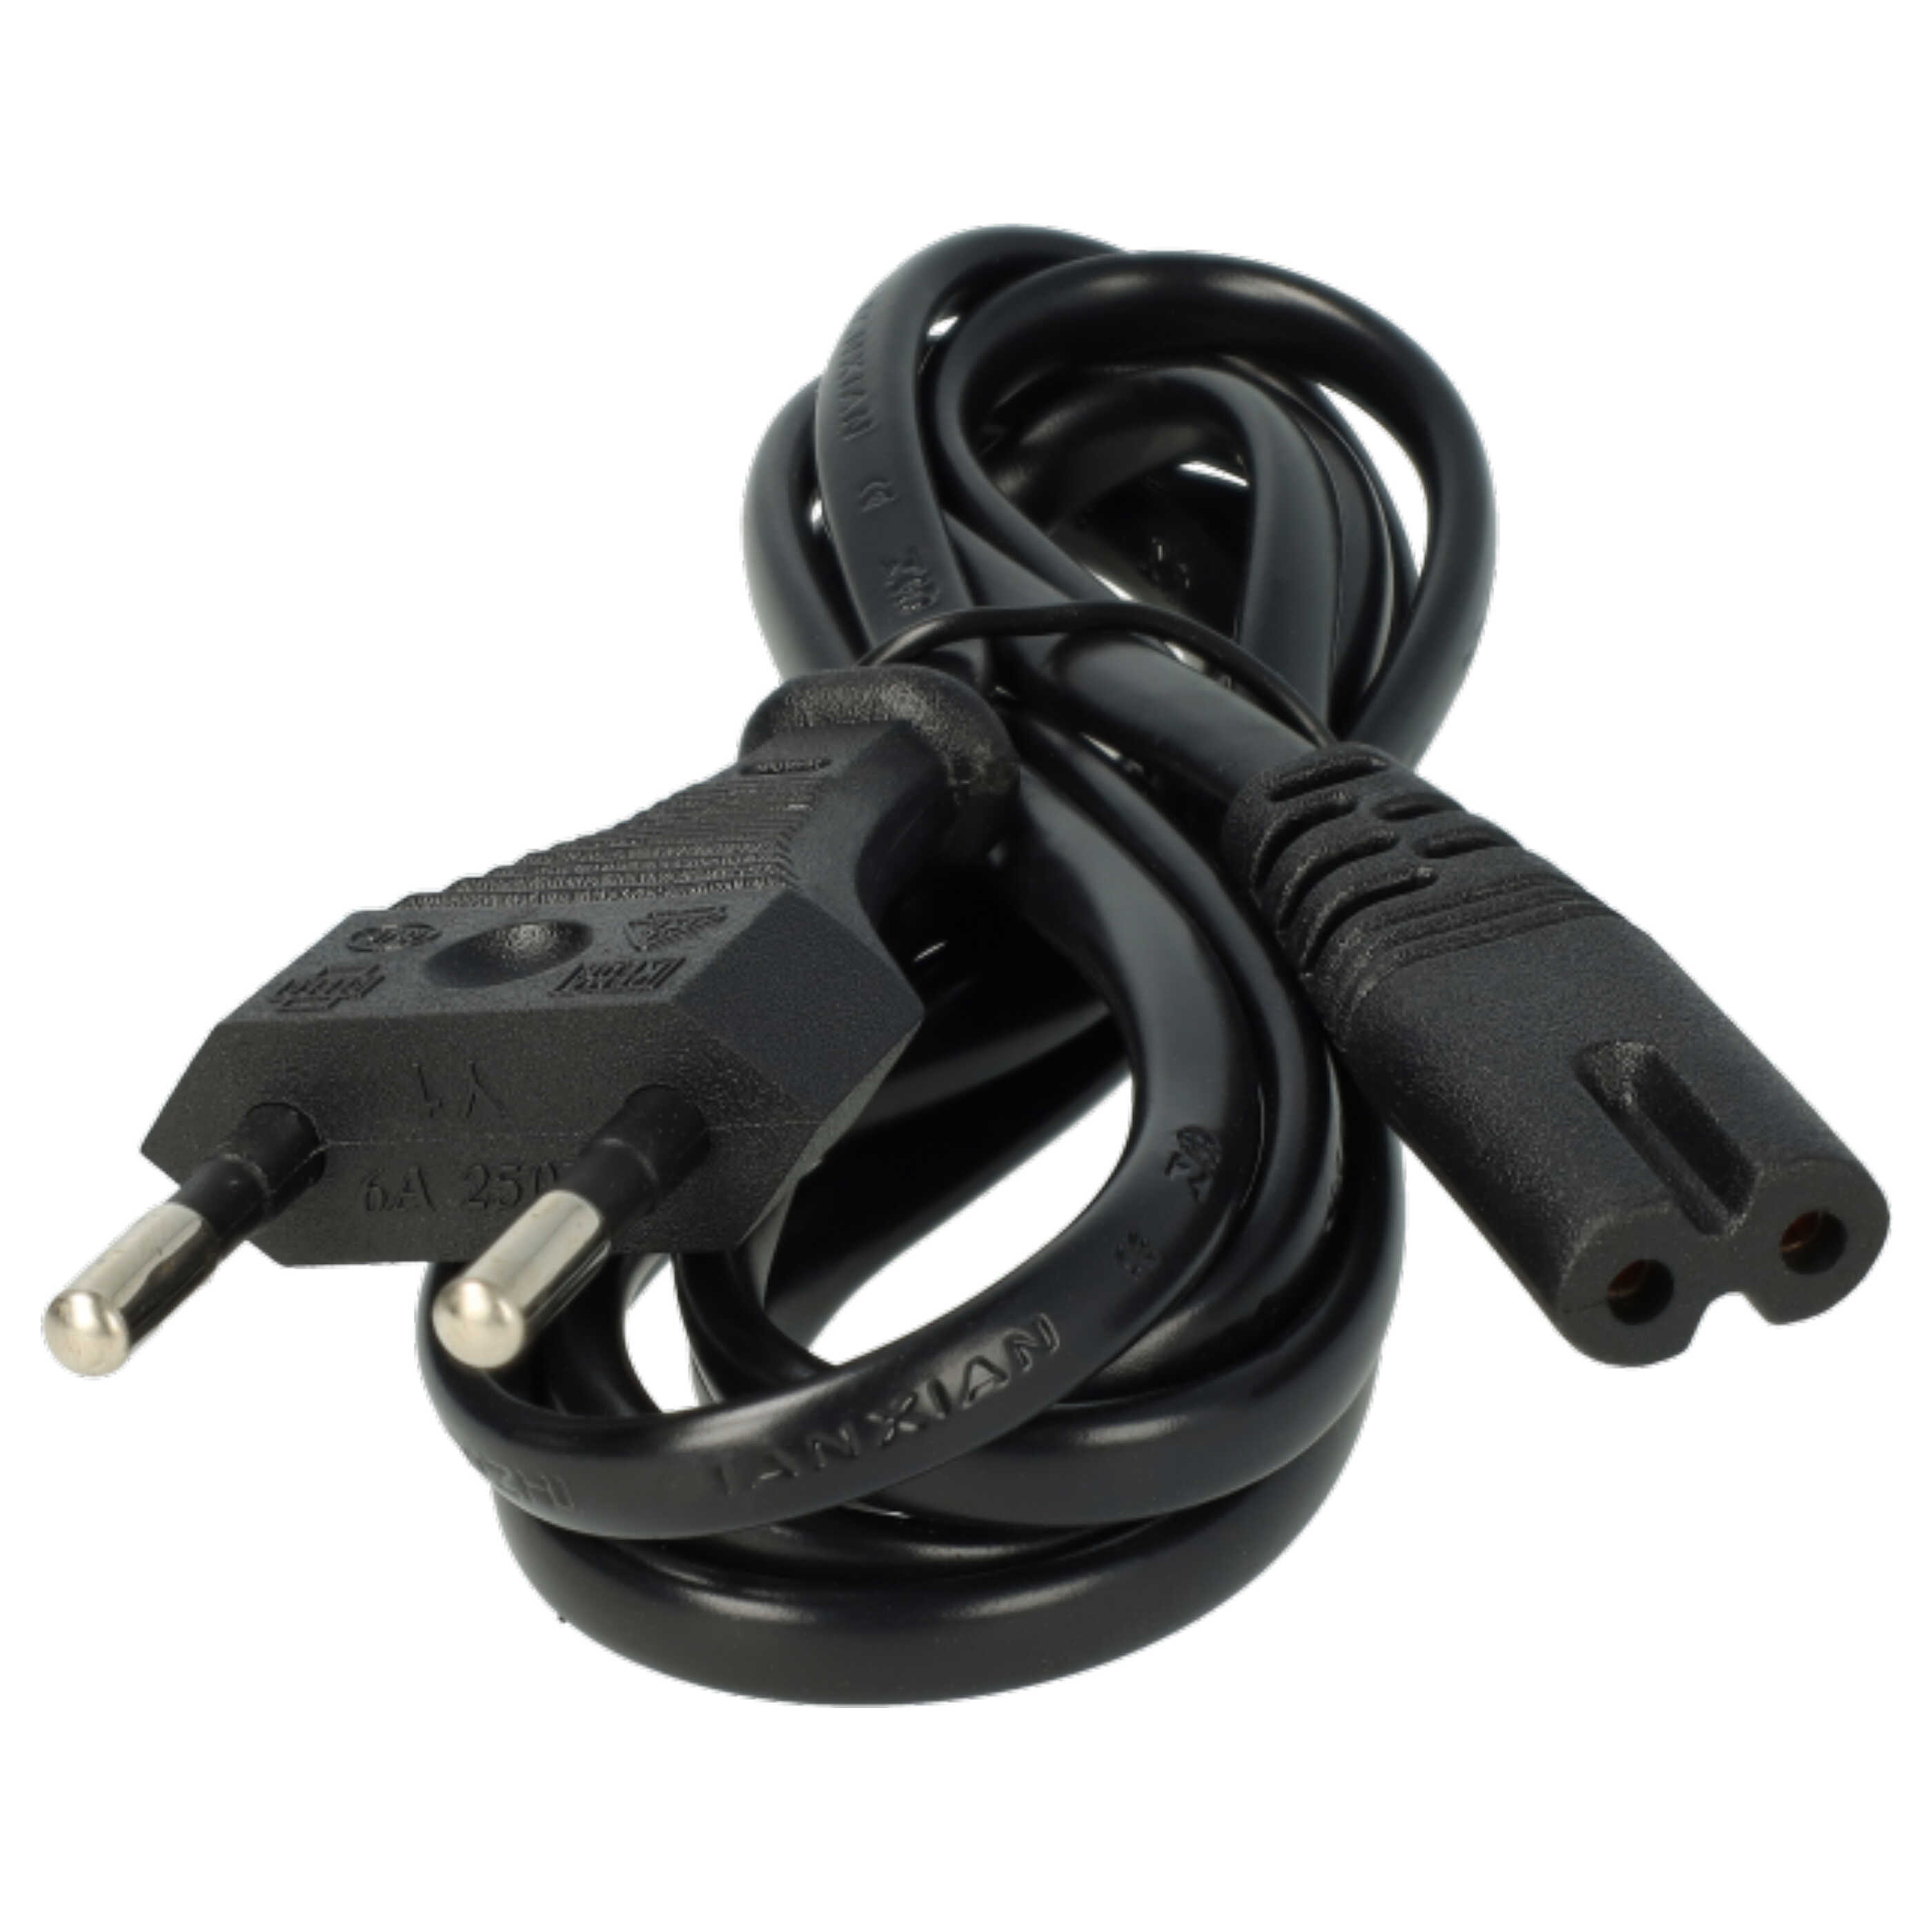 Charger suitable for E-Bike Battery - With Round Plug, 2.2 A